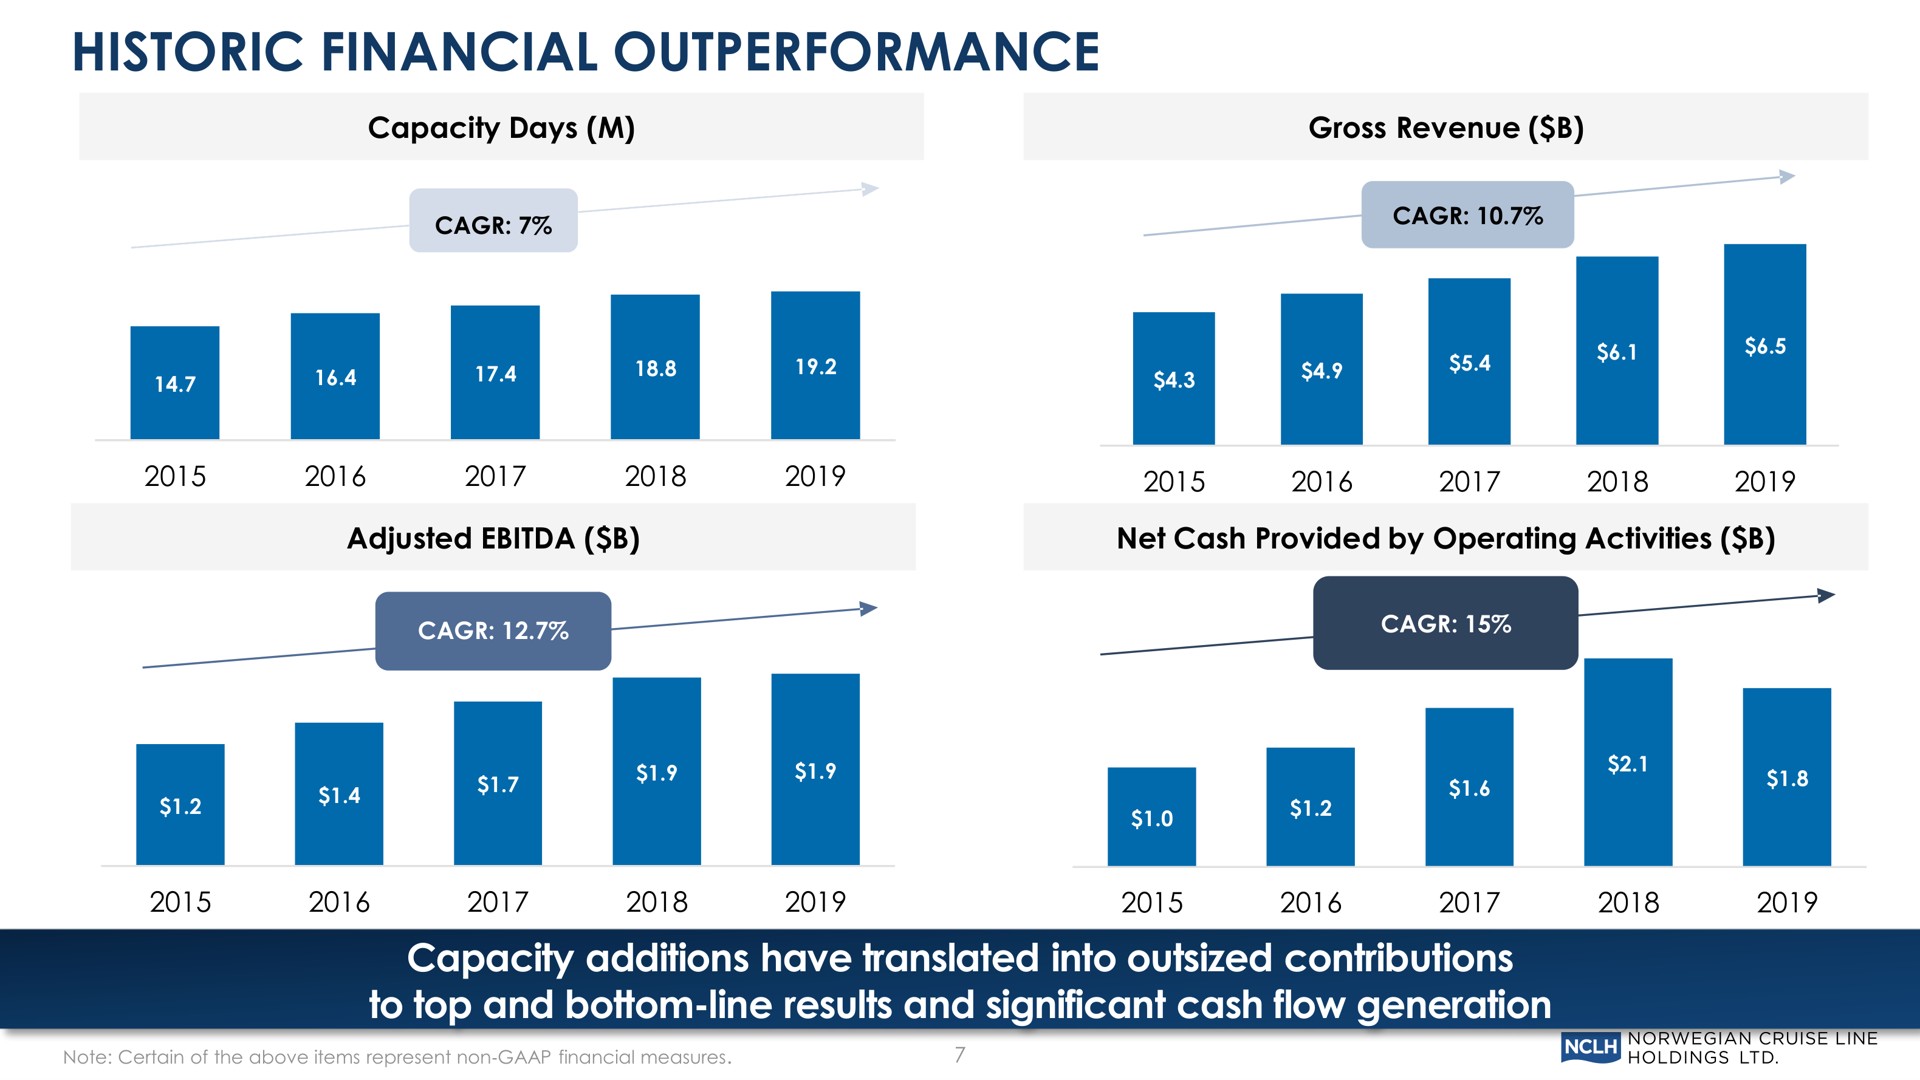 historic financial capacity additions have translated into outsized contributions to top and bottom line results and significant cash flow generation | Norwegian Cruise Line